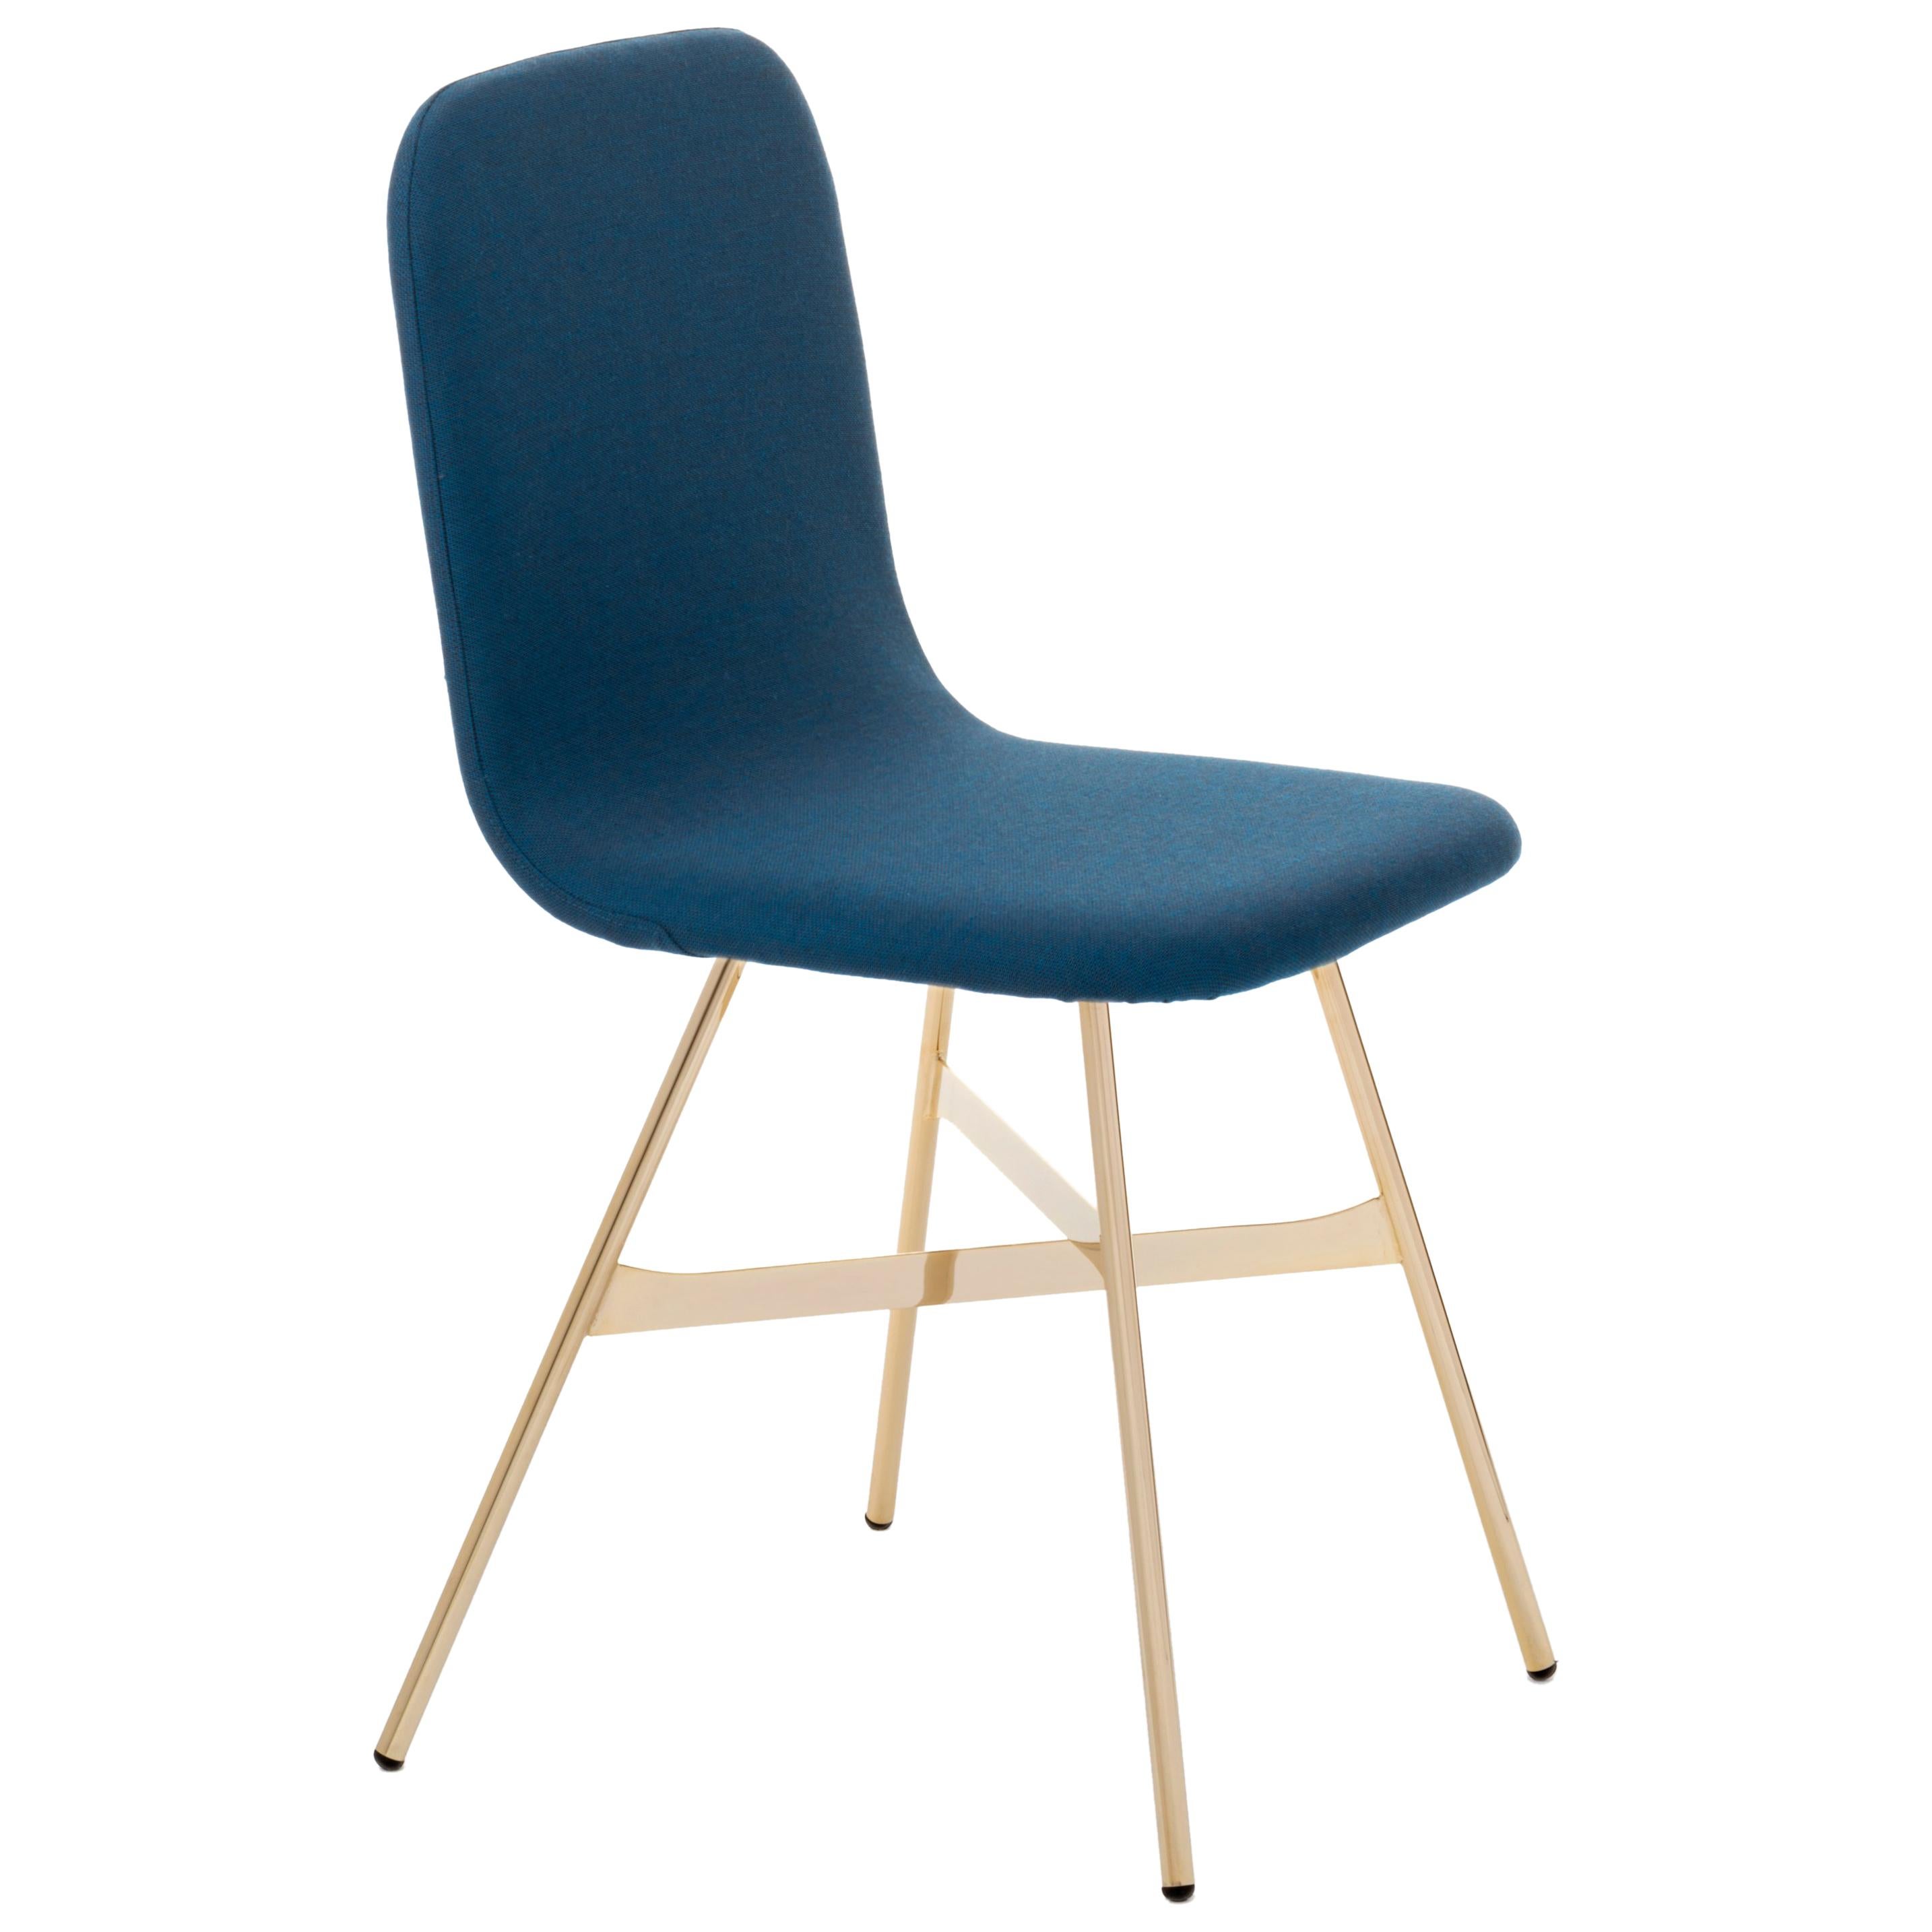 Contemporary Tria Simple Chair Golden Legs Upholstered in Fine Palm Green Wool, Made in Italy For Sale